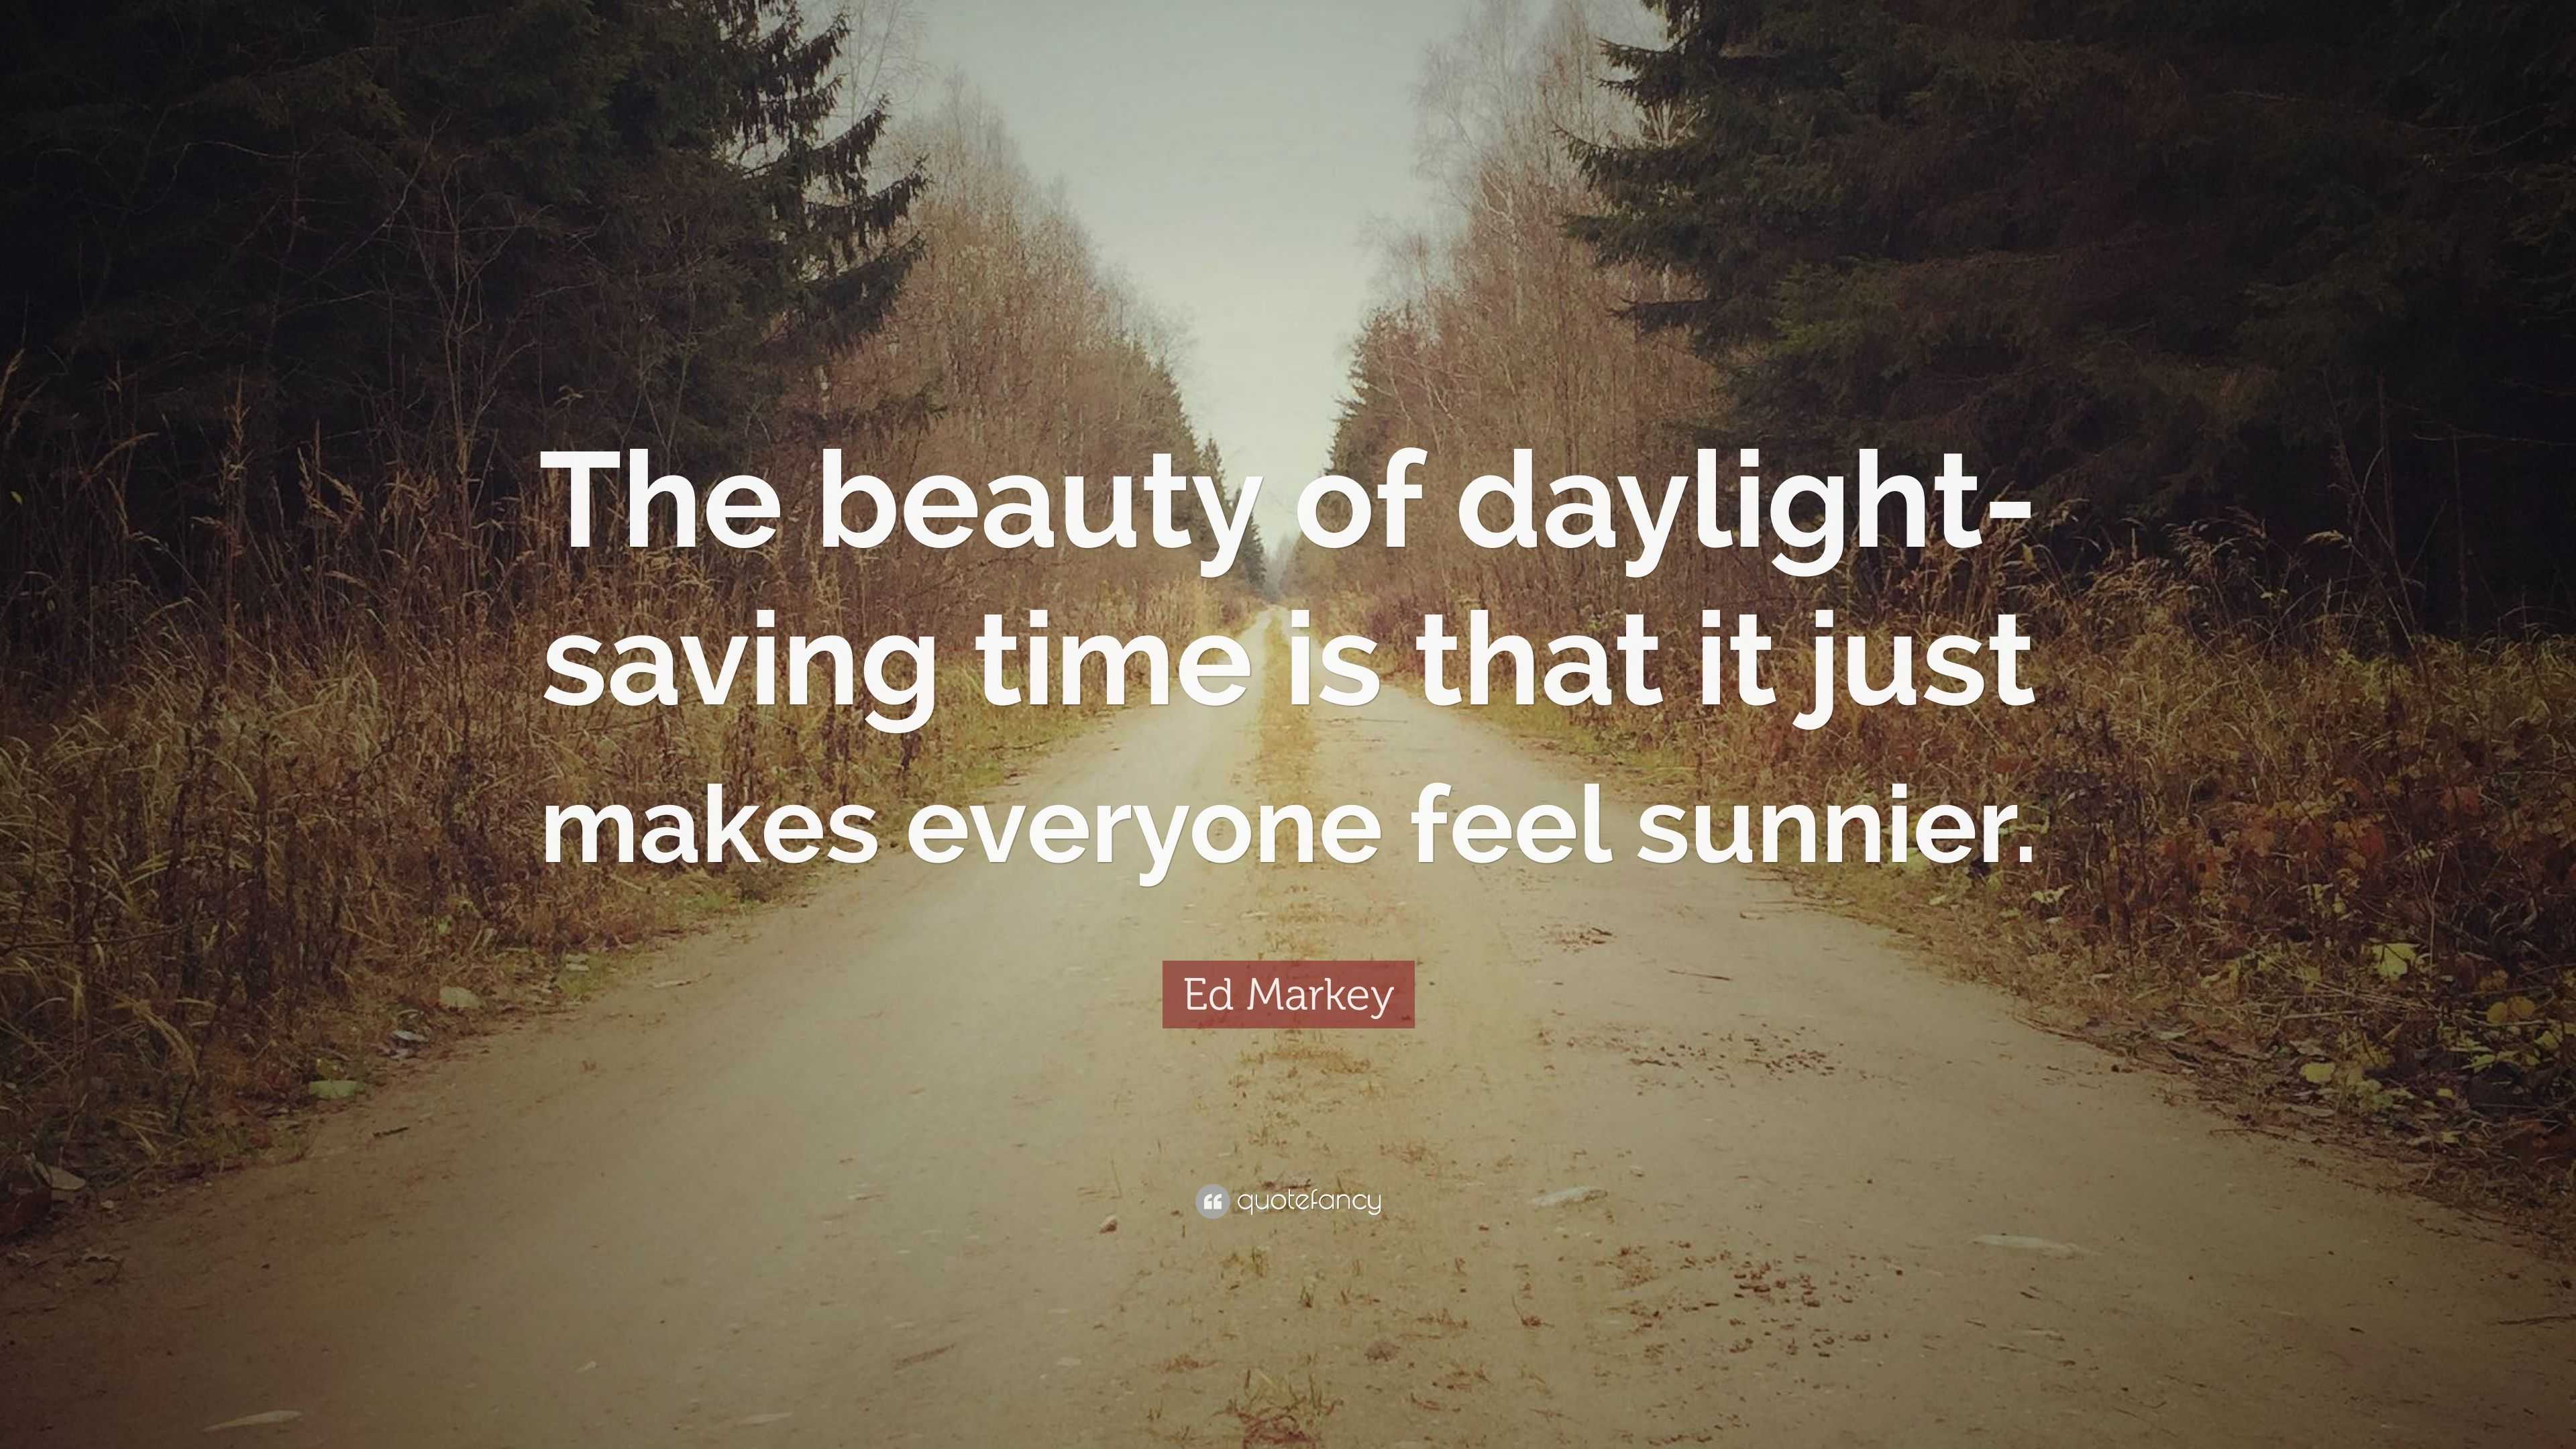 Ed Markey Quote “The beauty of daylightsaving time is that it just